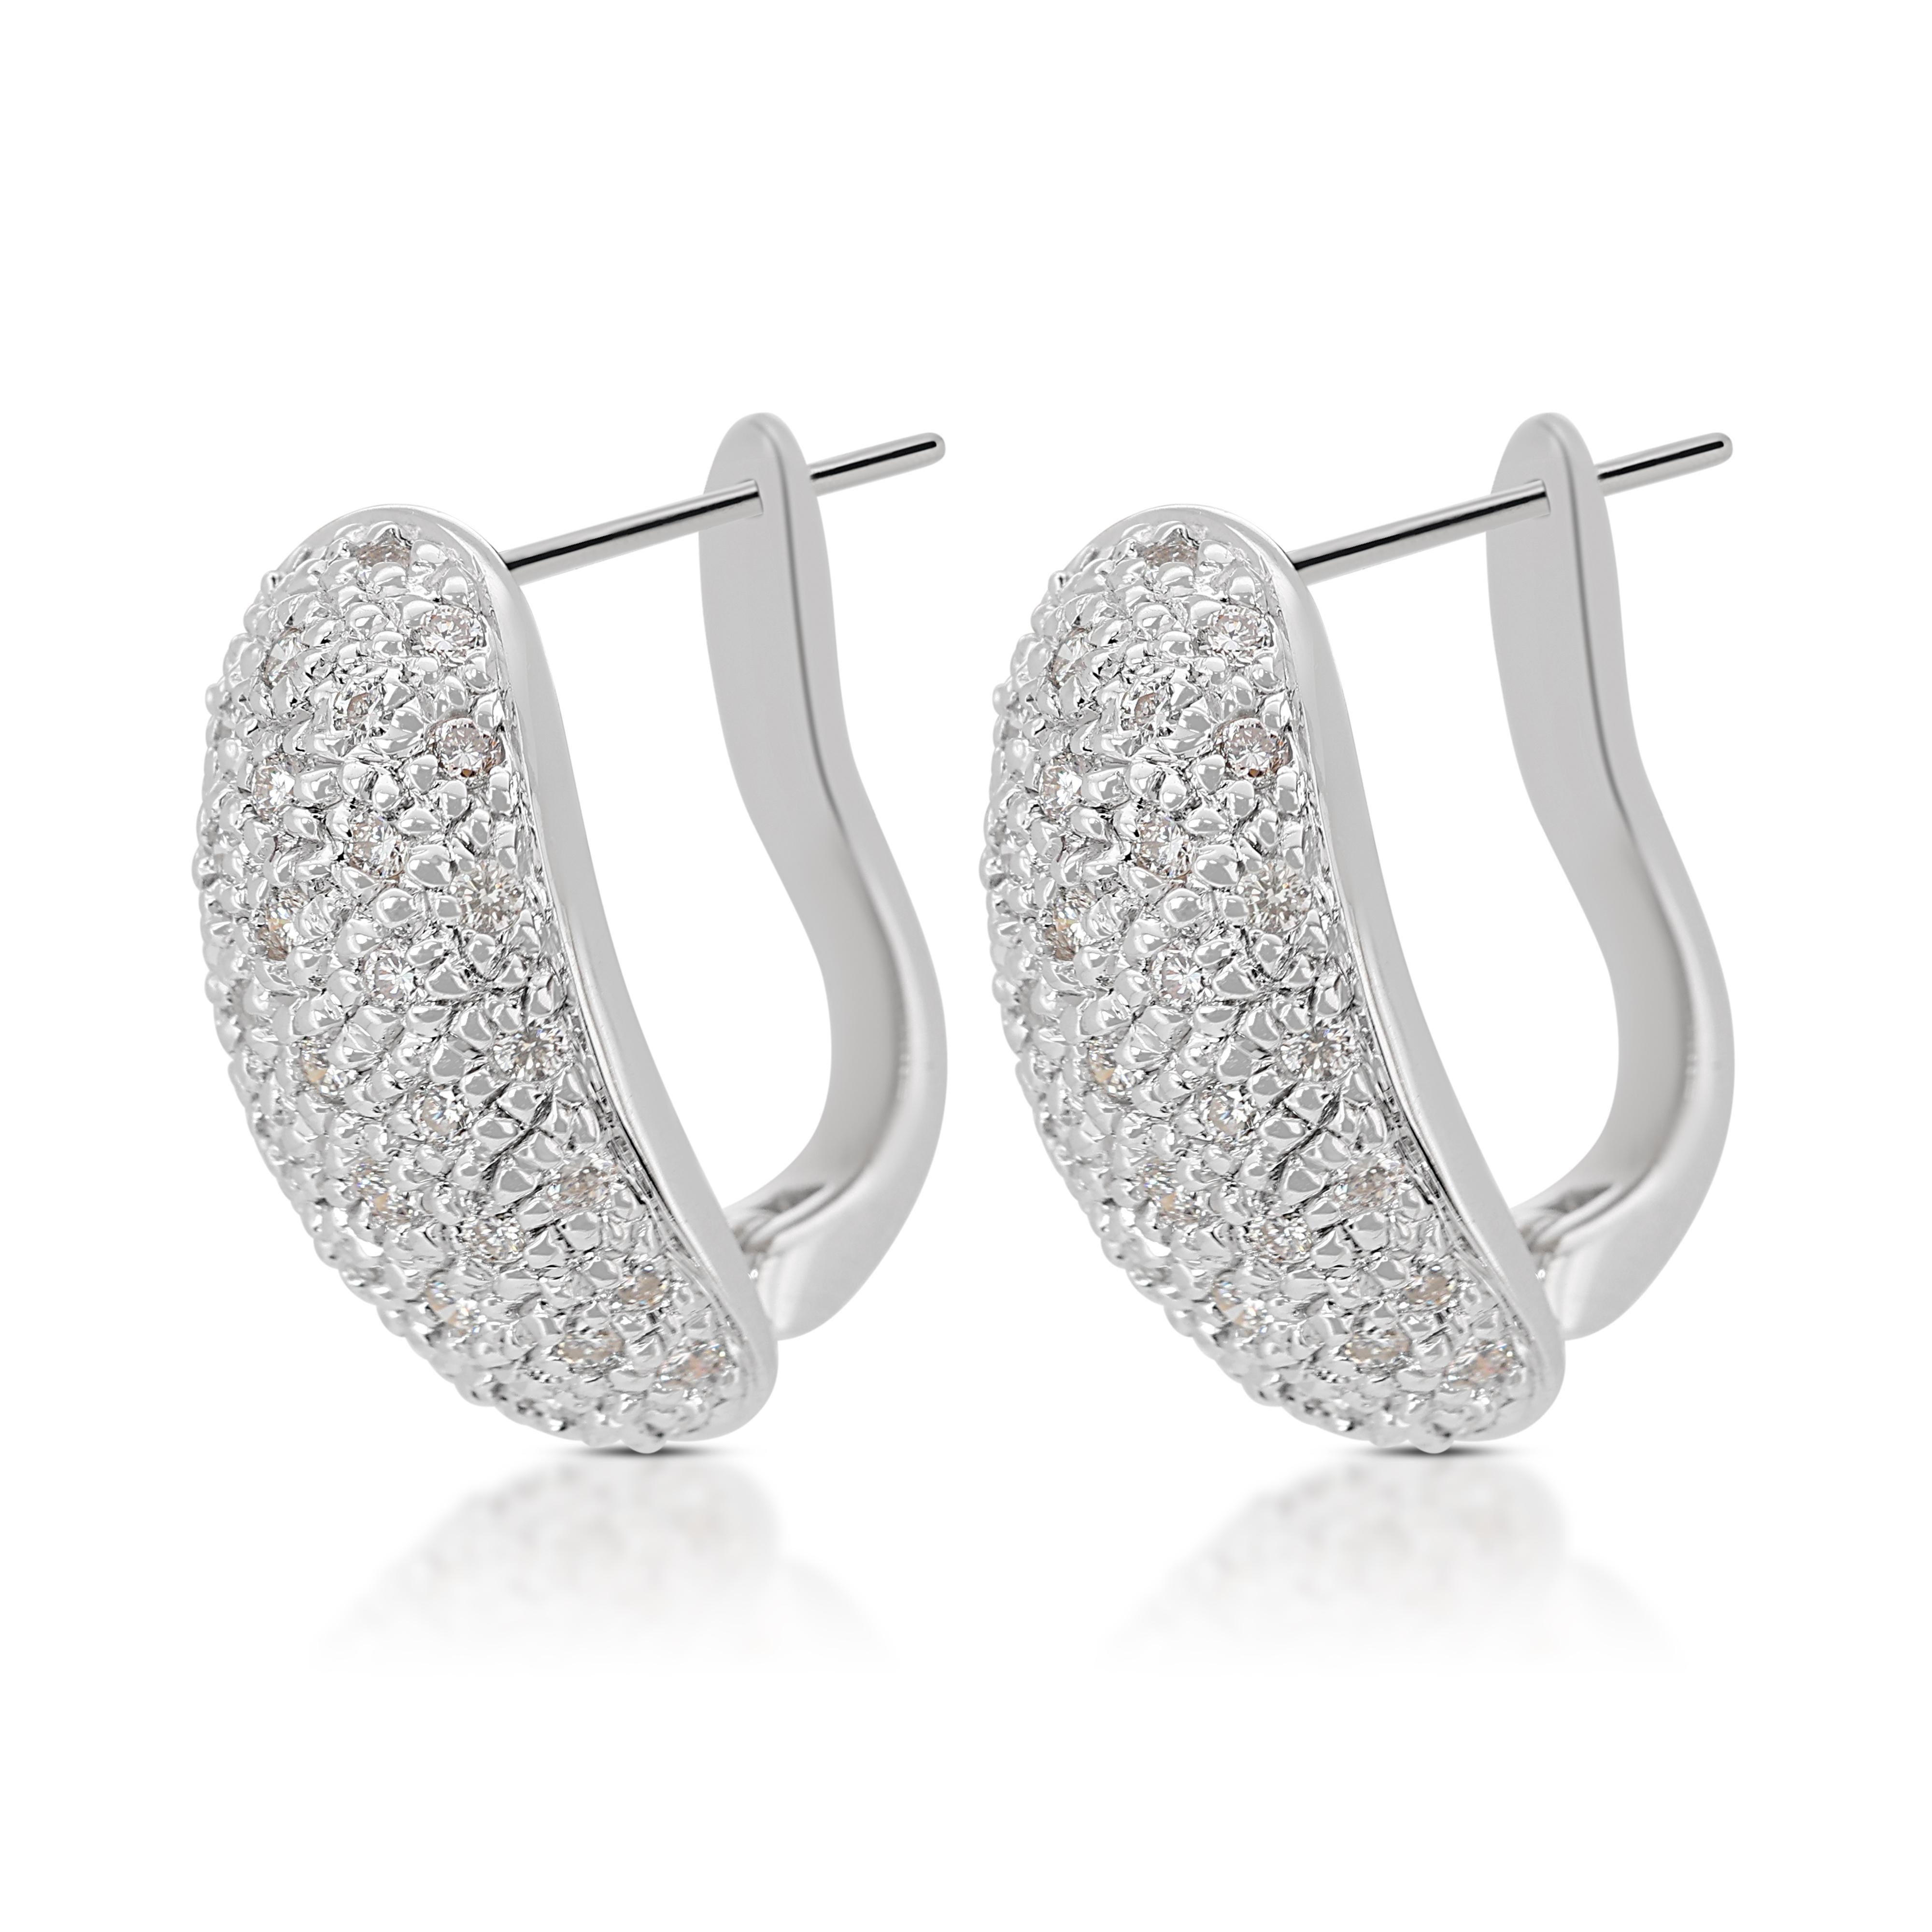 Embrace timeless sophistication with this captivating diamond earrings. Crafted in lustrous 18K white gold, this piece features a mesmerizing cluster of 76 round brilliant cut diamonds, boasting a combined carat weight of 0.40ct. The diamonds